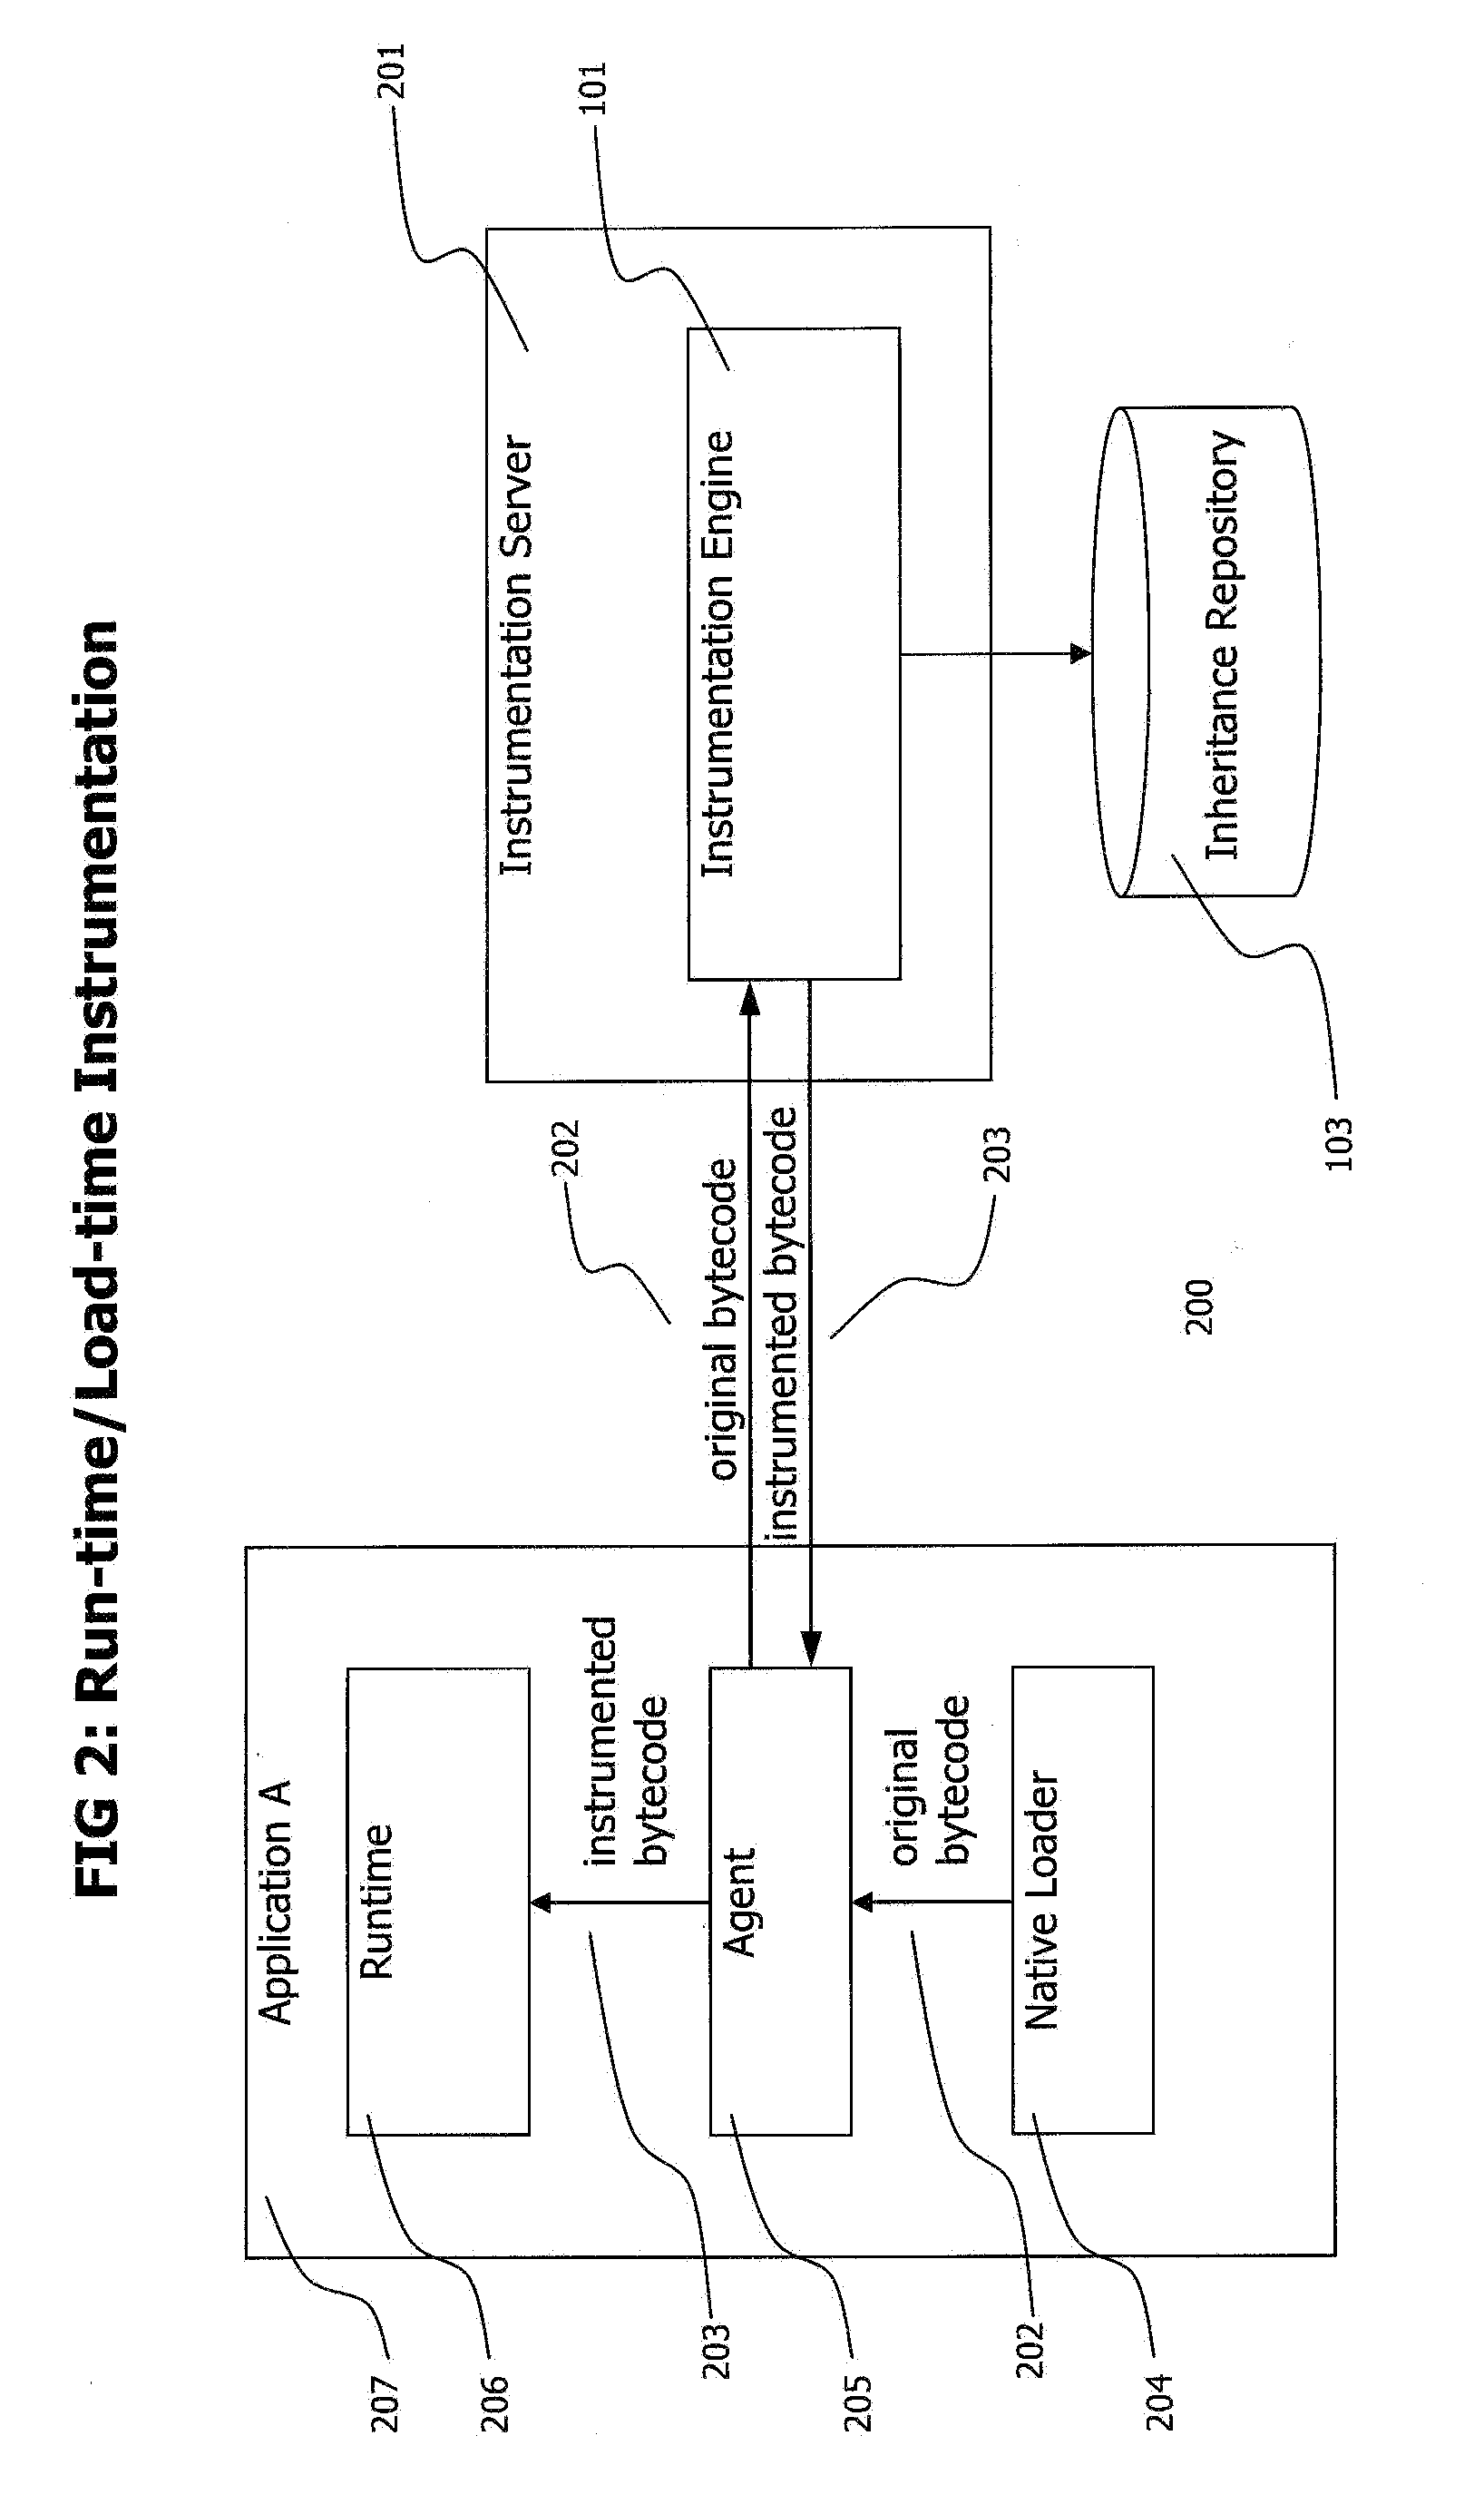 Method and System for Adaptive, Generic Code Instrumentation using Run-time or Load-time generated Inheritance Information for Diagnosis and Monitoring Application Performance and Failure